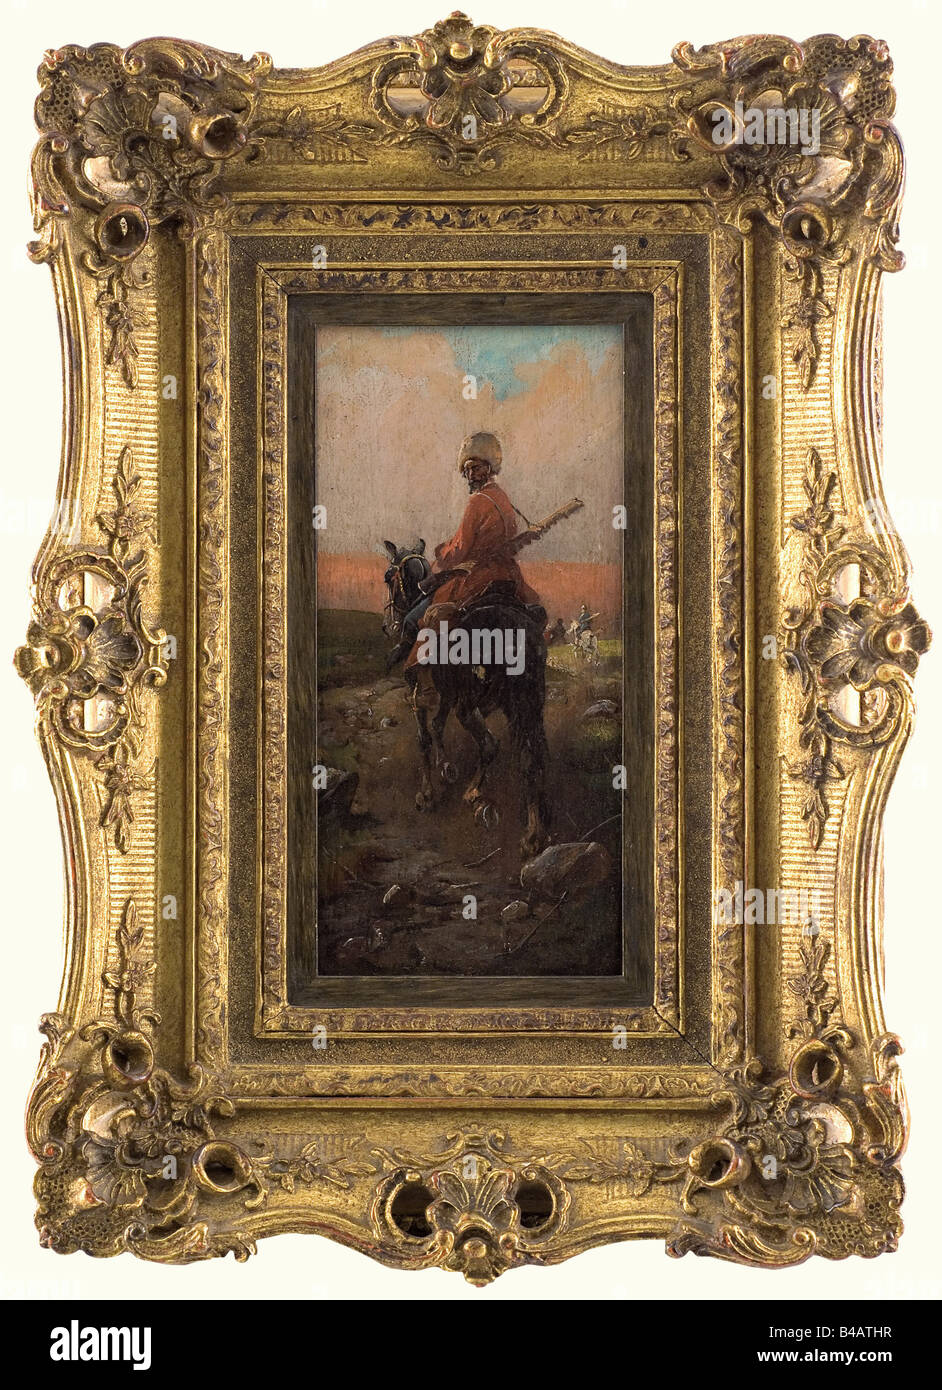 'Cossack patrol', a horseman with red coat looking over his shoulder. Oil on wood, signed illegibly on the lower left. Gilt stucco frame, size of painting: 11 x 22.5 cm. On the reverse the inscription 'Jan Konarski'. fine arts, people, 19th century, object, objects, stills, clipping, clippings, cut out, cut-out, cut-outs, painting, paintings, fine arts, art, picture, pictures, illustrations, man, men, male, Artist's Copyright has not to be cleared Stock Photo